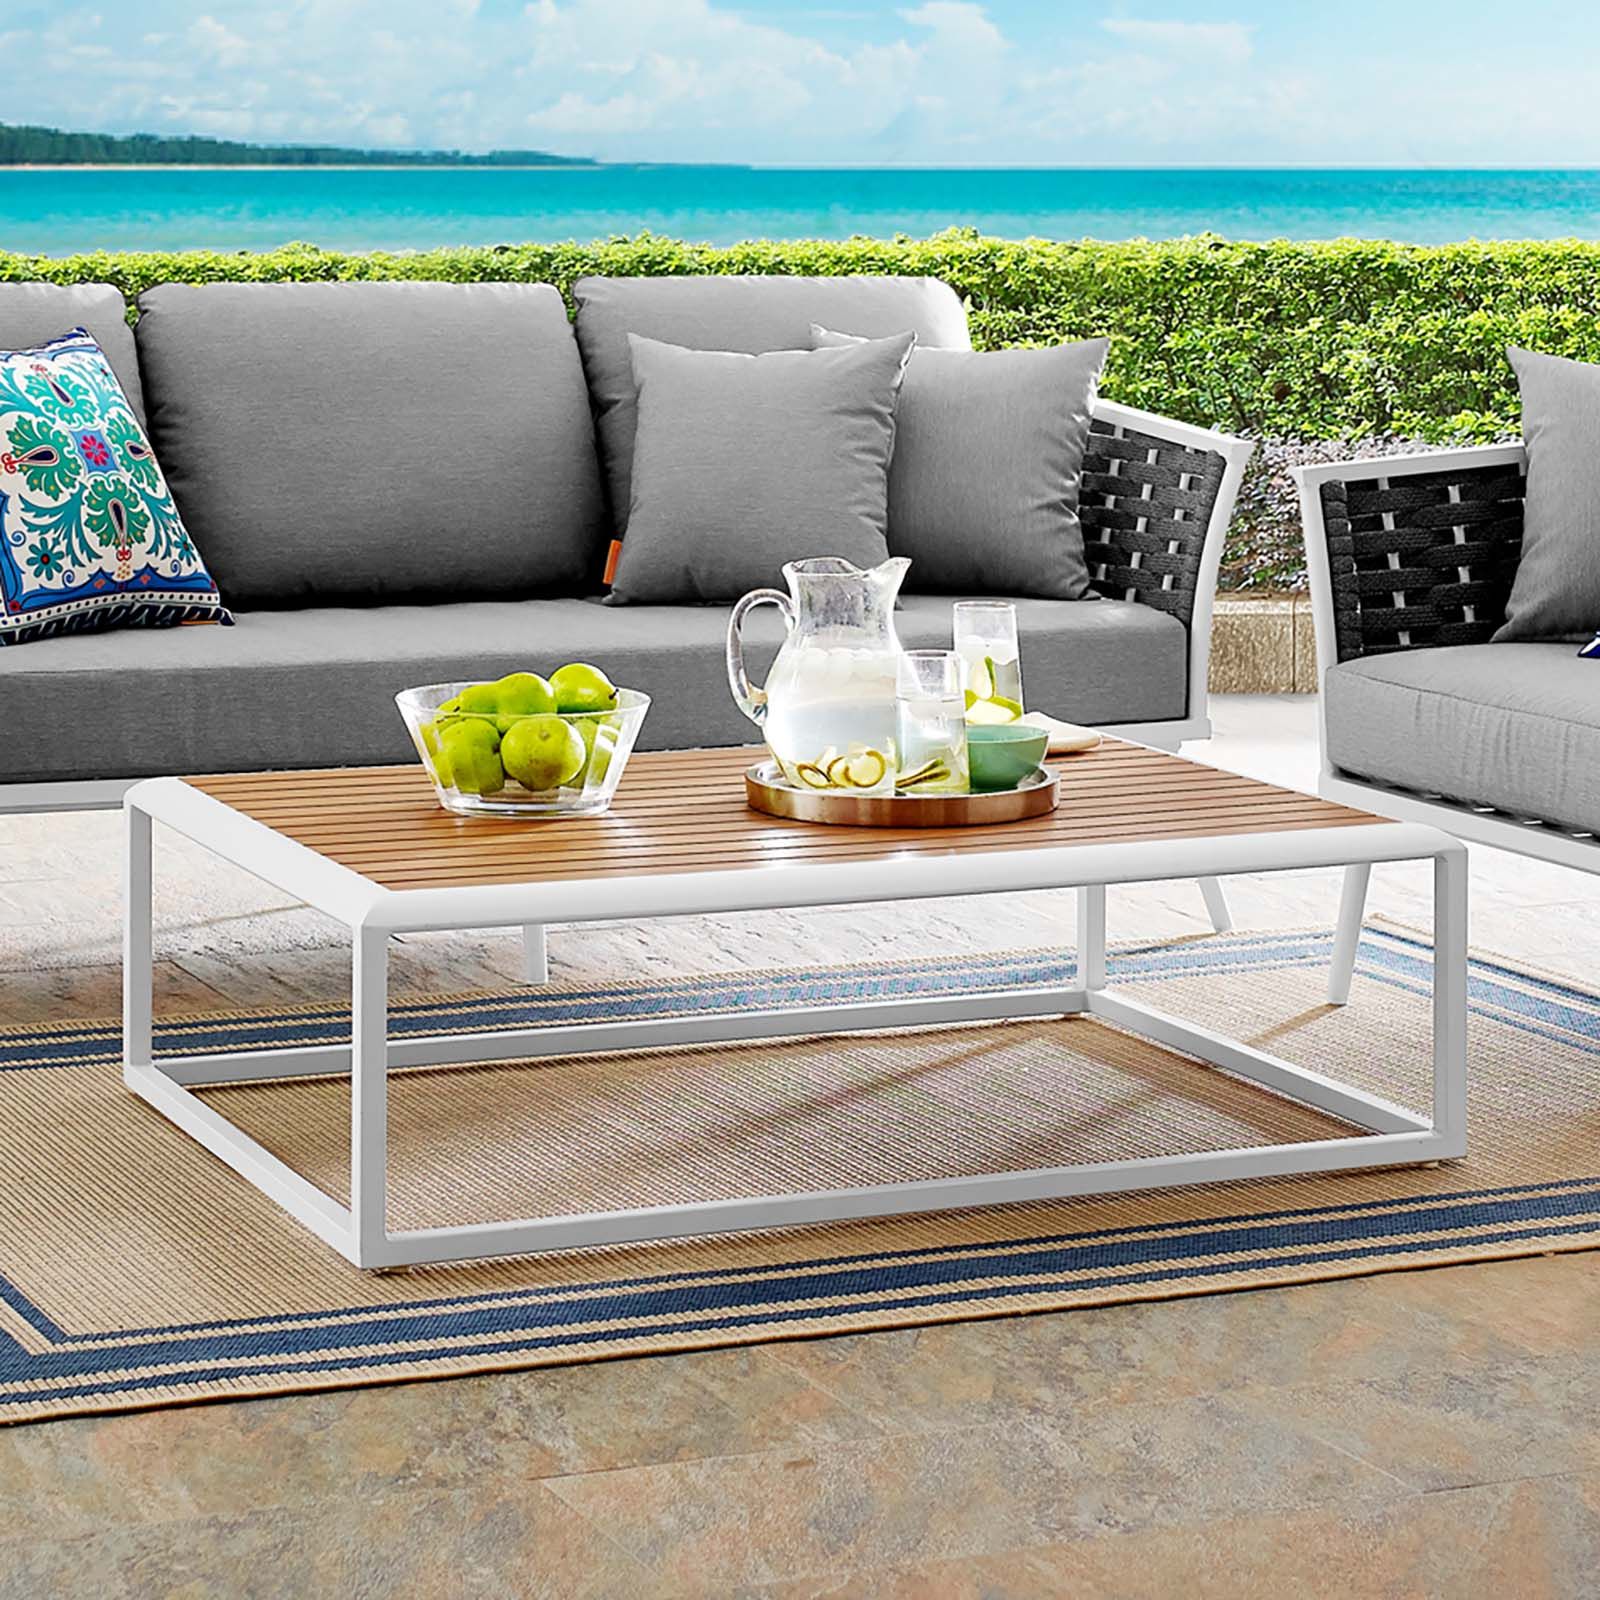 Modterior :: Outdoor :: Coffee Tables :: Stance Outdoor Patio Aluminum Pertaining To Modern Outdoor Patio Coffee Tables (View 5 of 15)